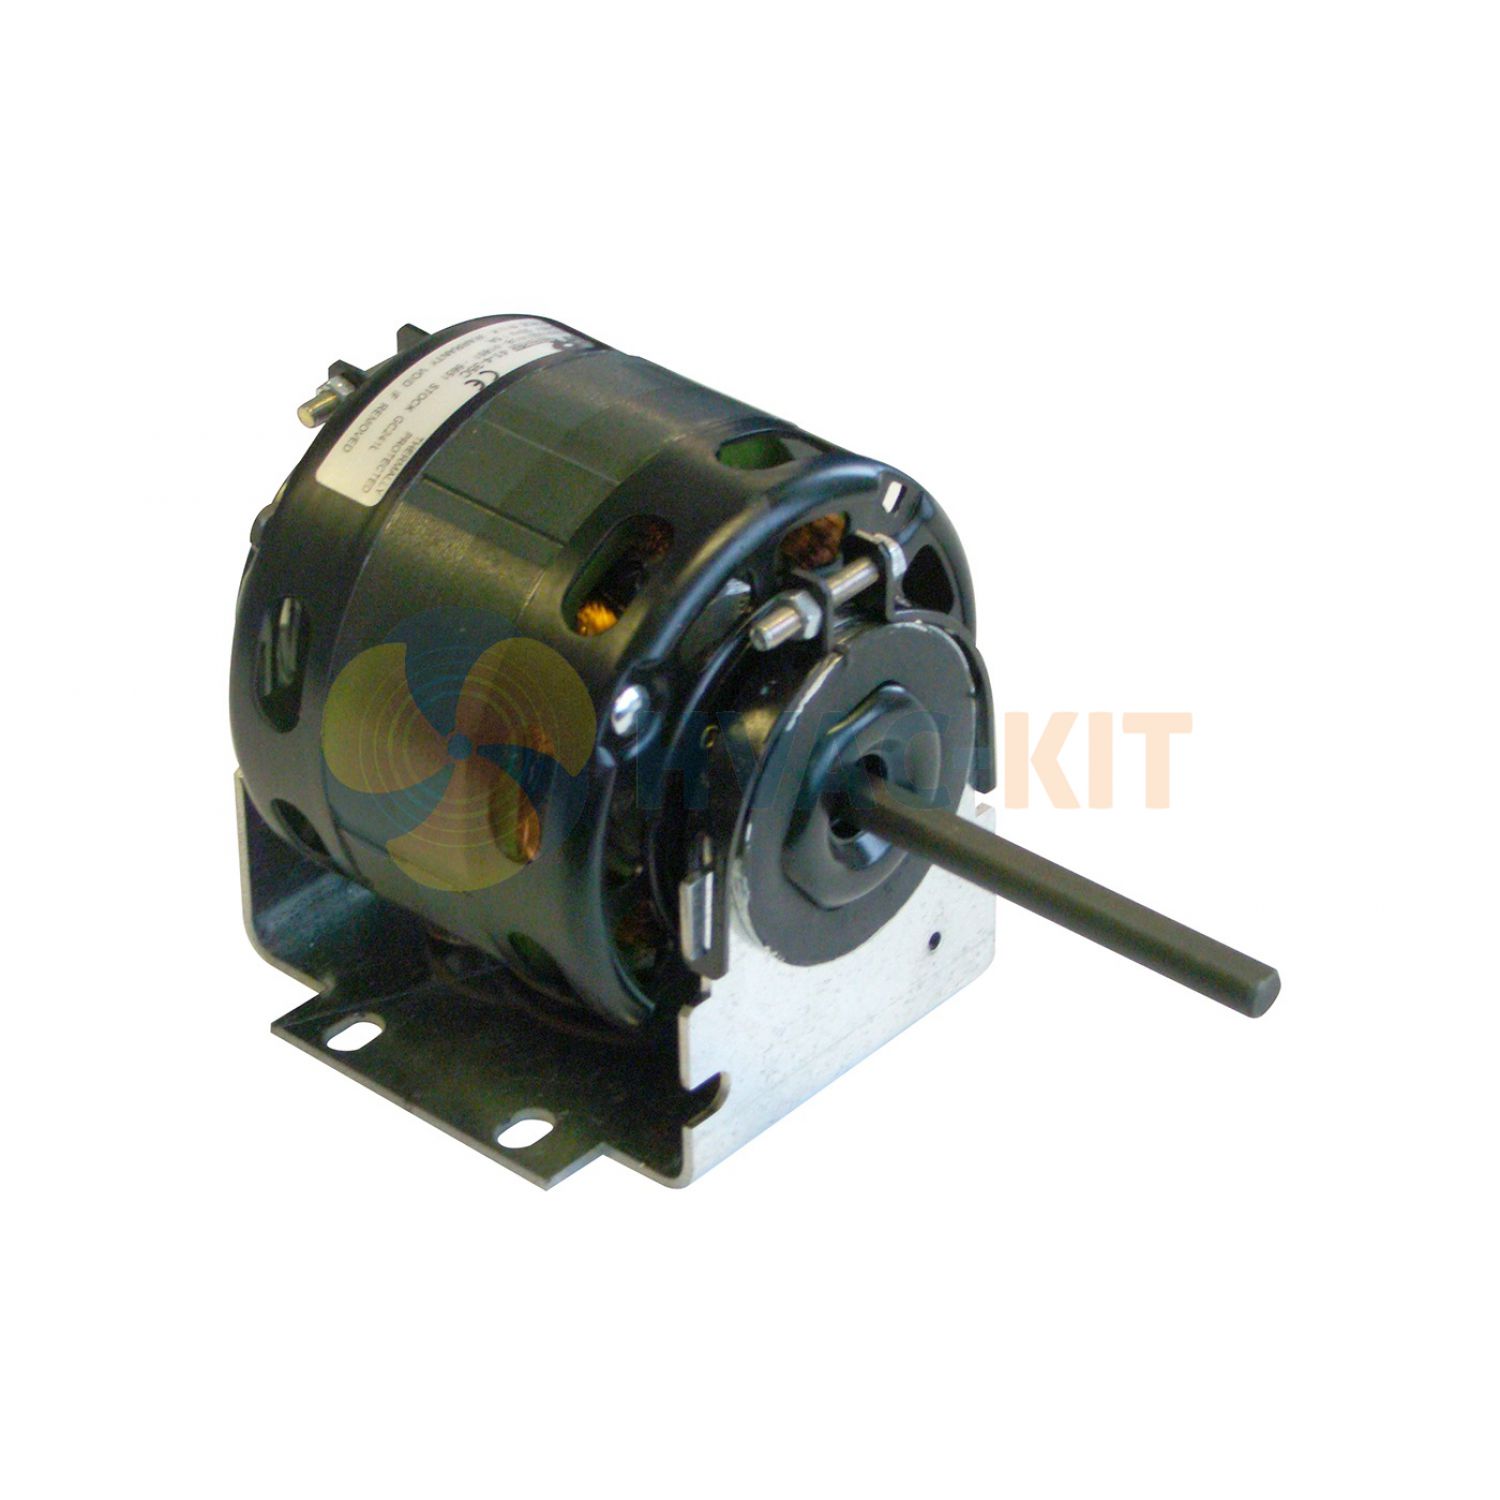 41-6-50A1-RB_6 Resilient Base Mount Motor